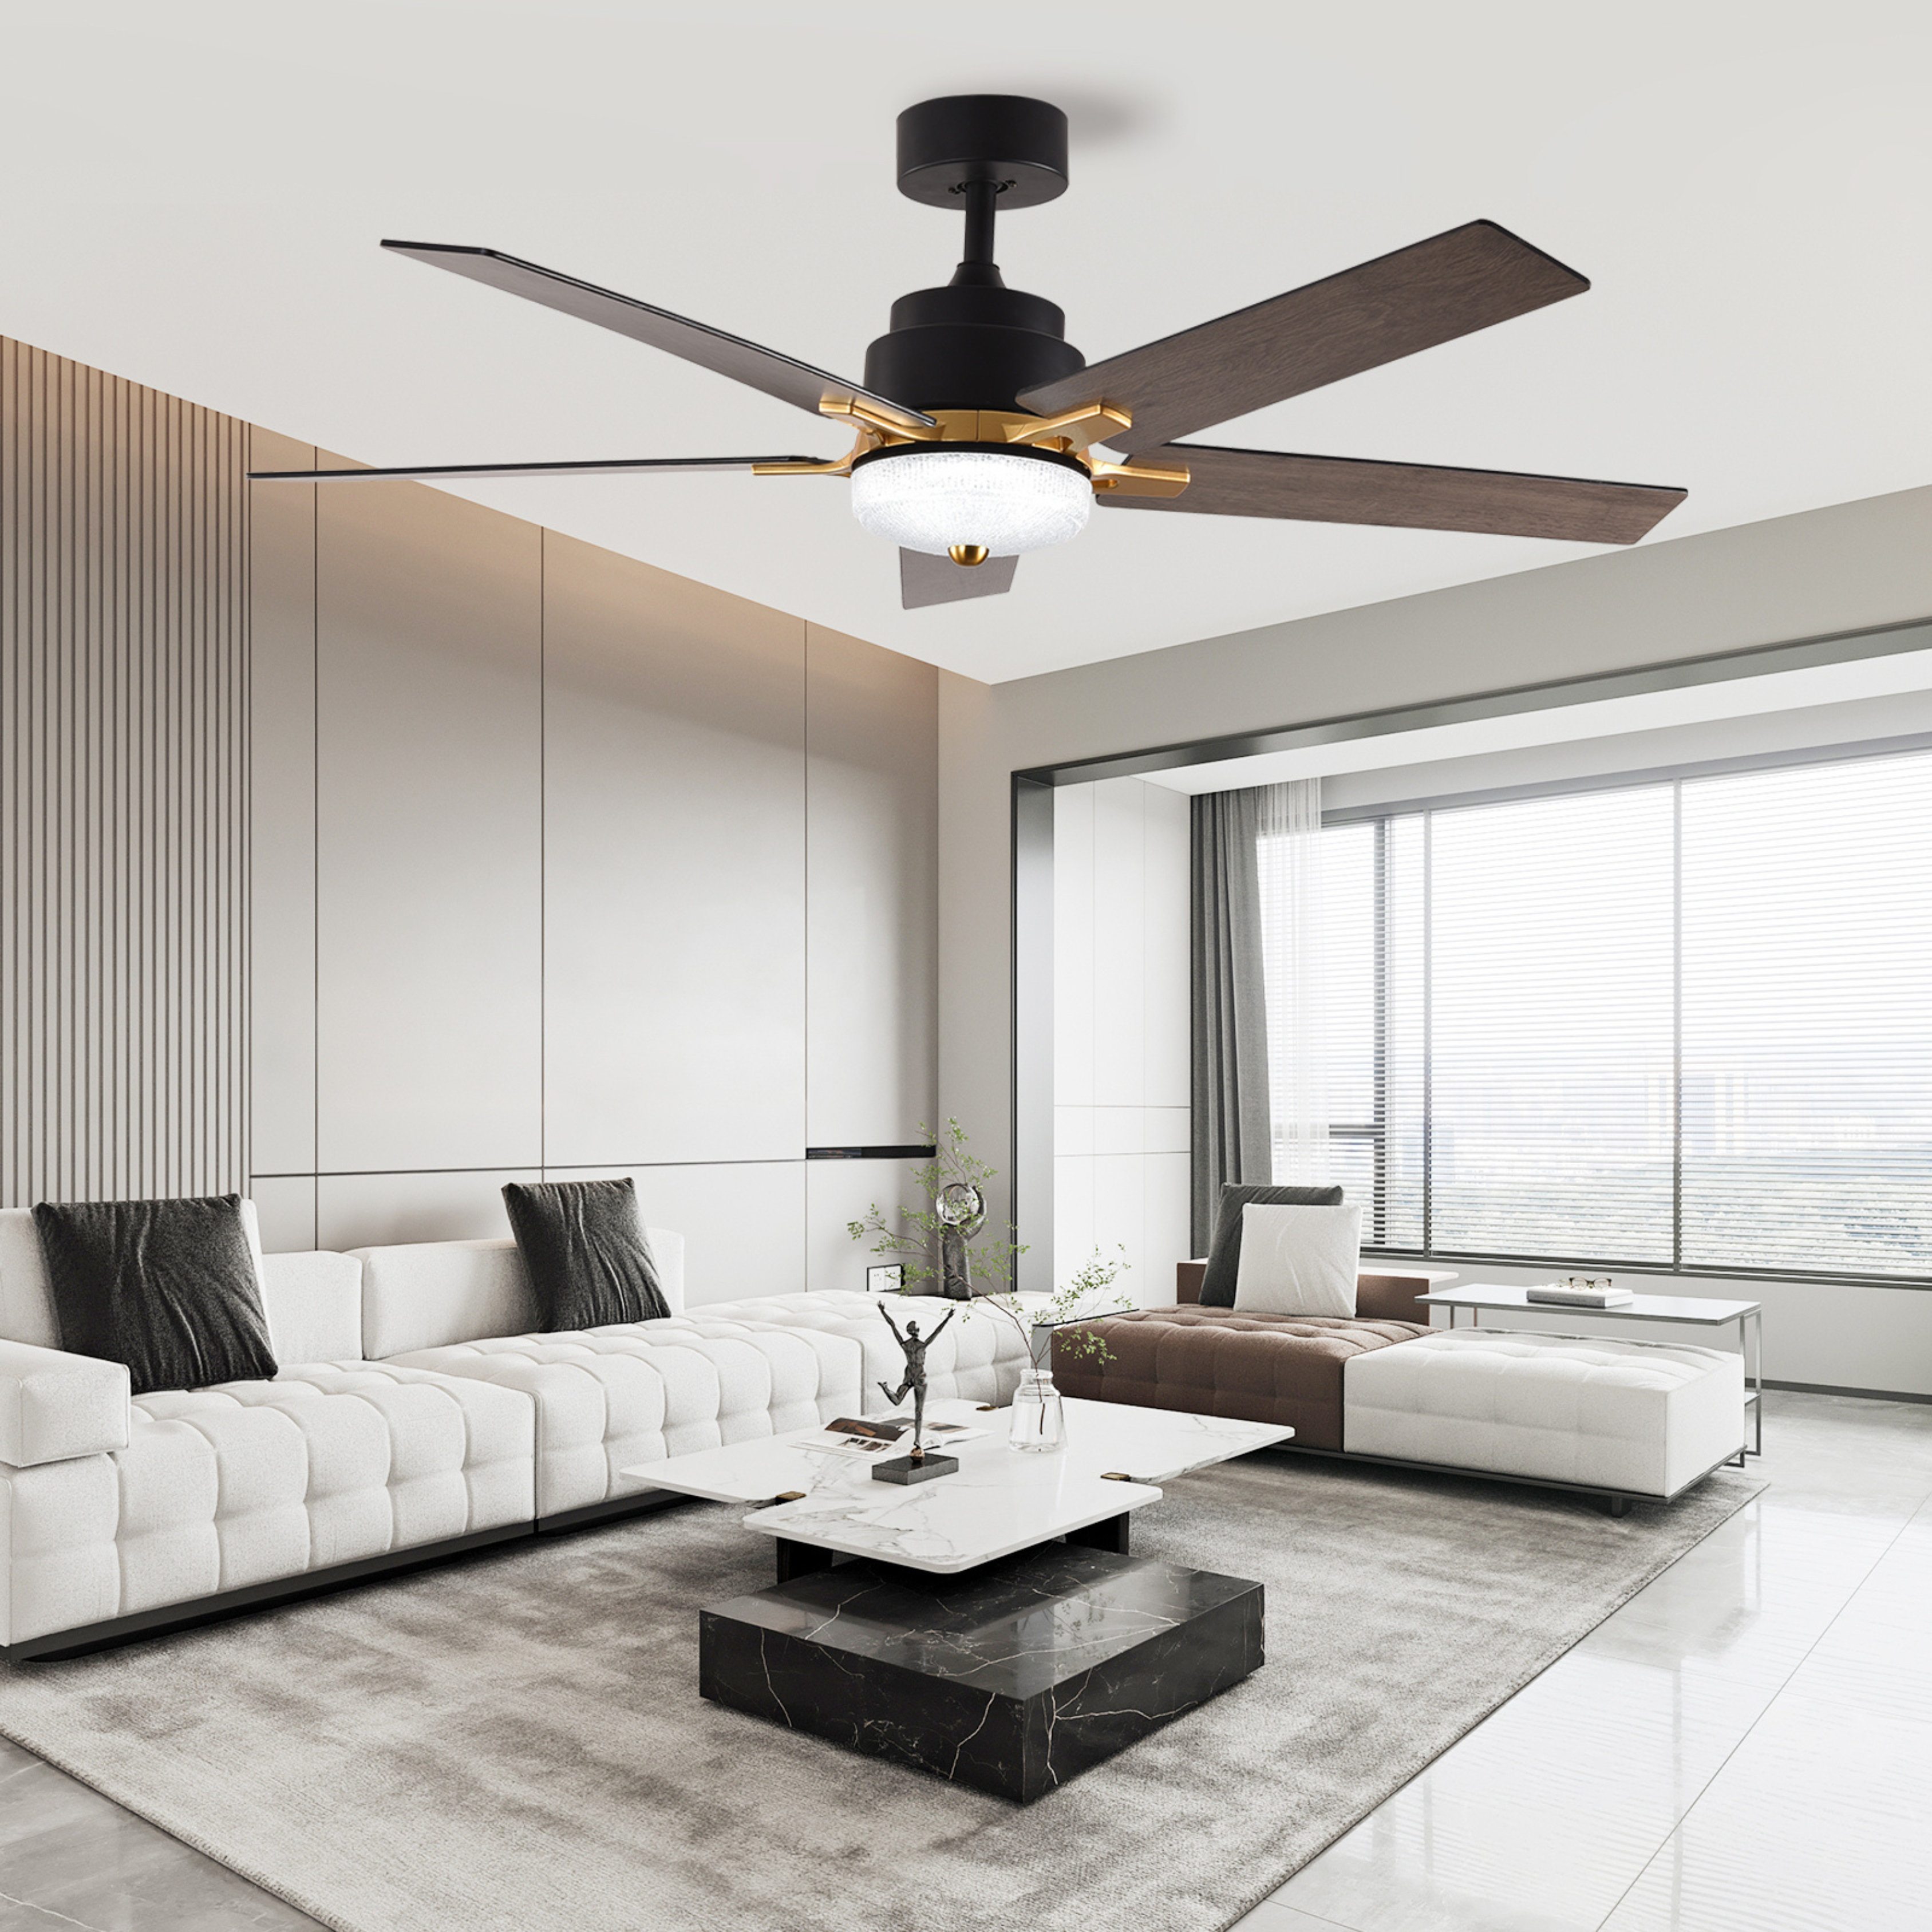 Ivy Bronx Emilo 52 Inch Downrod Modern 5 Blades Ceiling Fans with Lights  Remote Control for Bedroom, Living Room